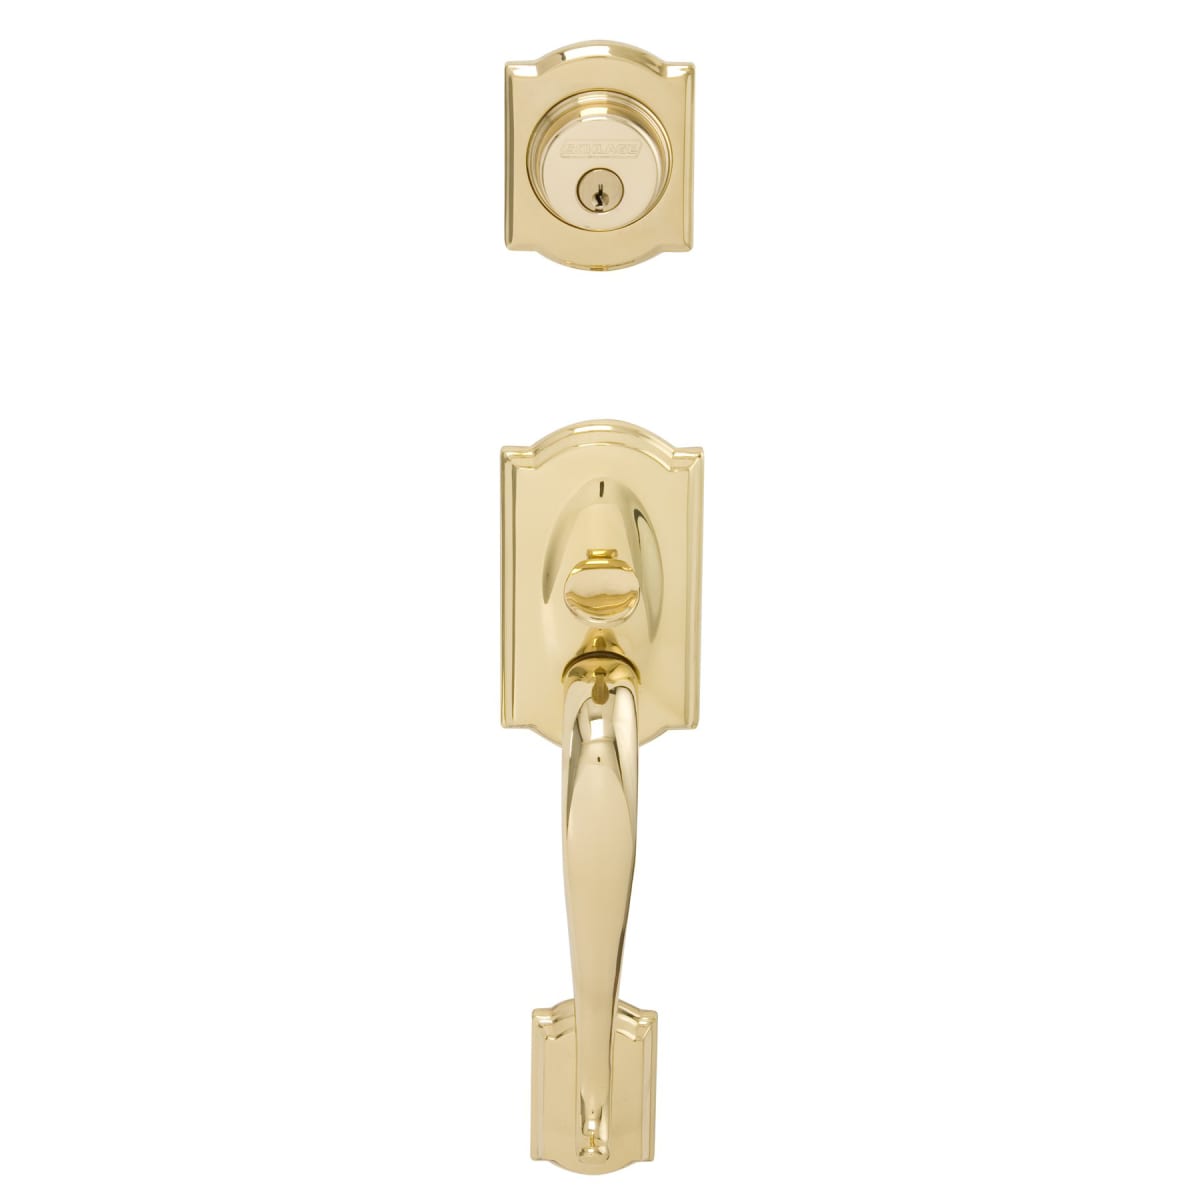 Schlage F62-CAM-FLA-RH Camelot Right Hand Double Cylinder Handleset with Flair I, Antique Brass by Schlage Lock Company - 2